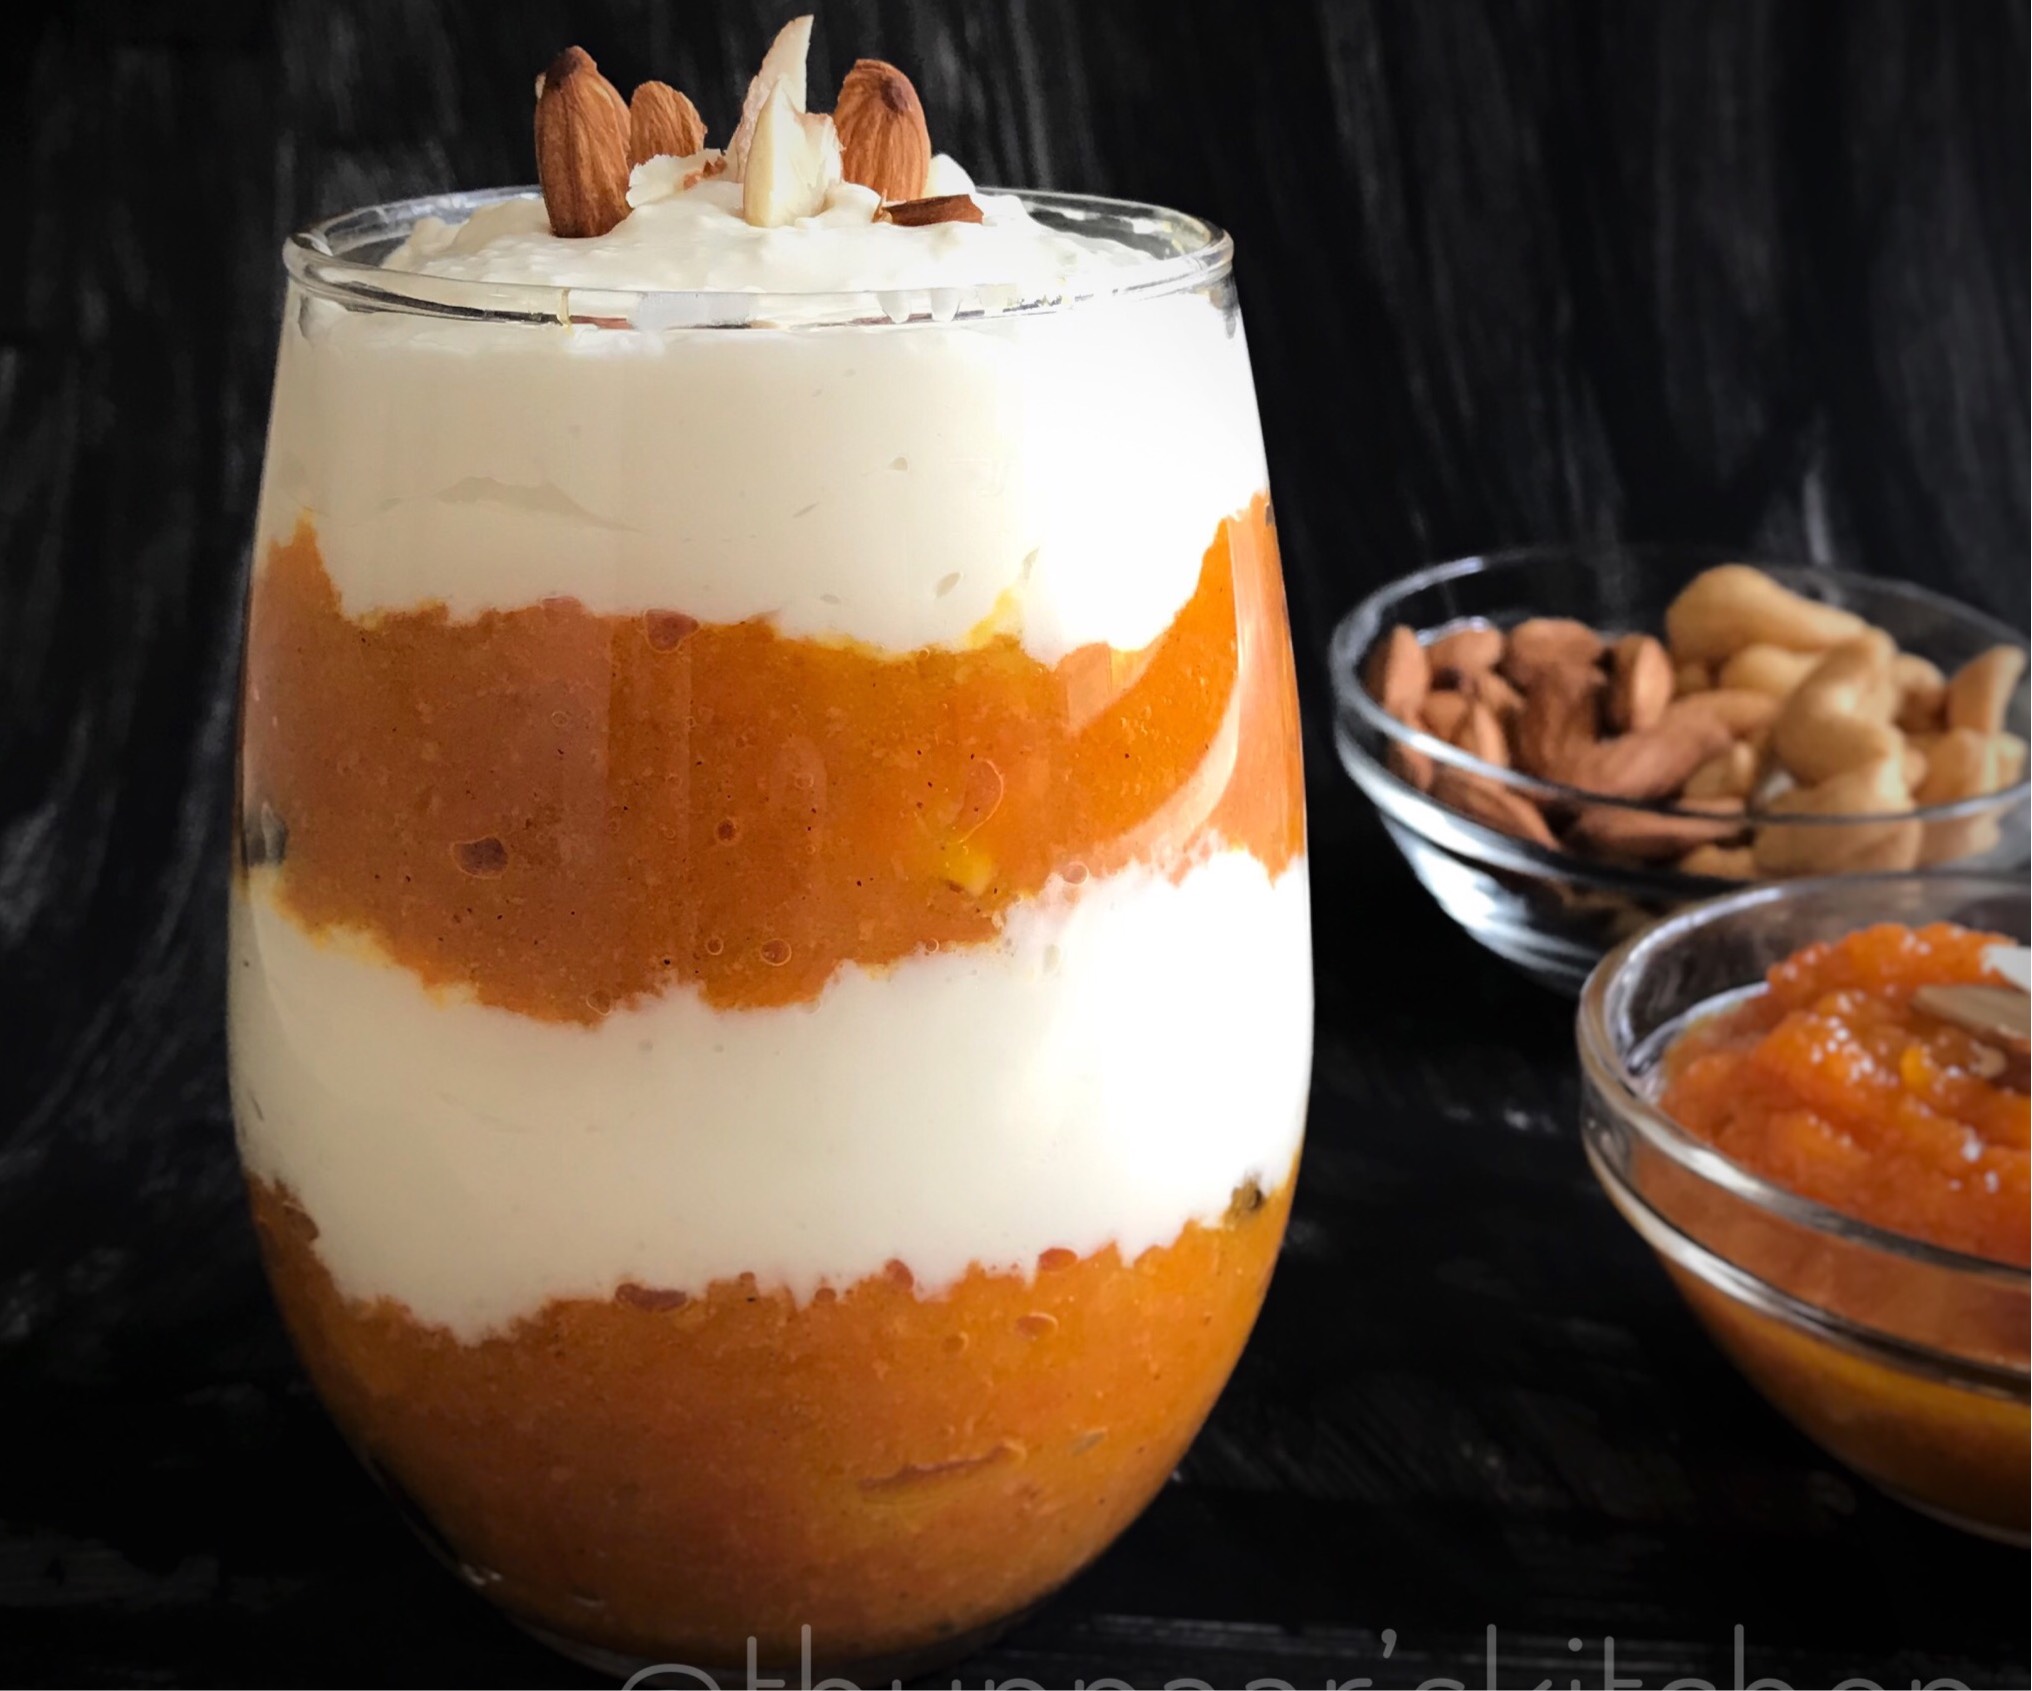 Carrot halwa parfait\Microwave carrot halwa with Cream cheese frosting: